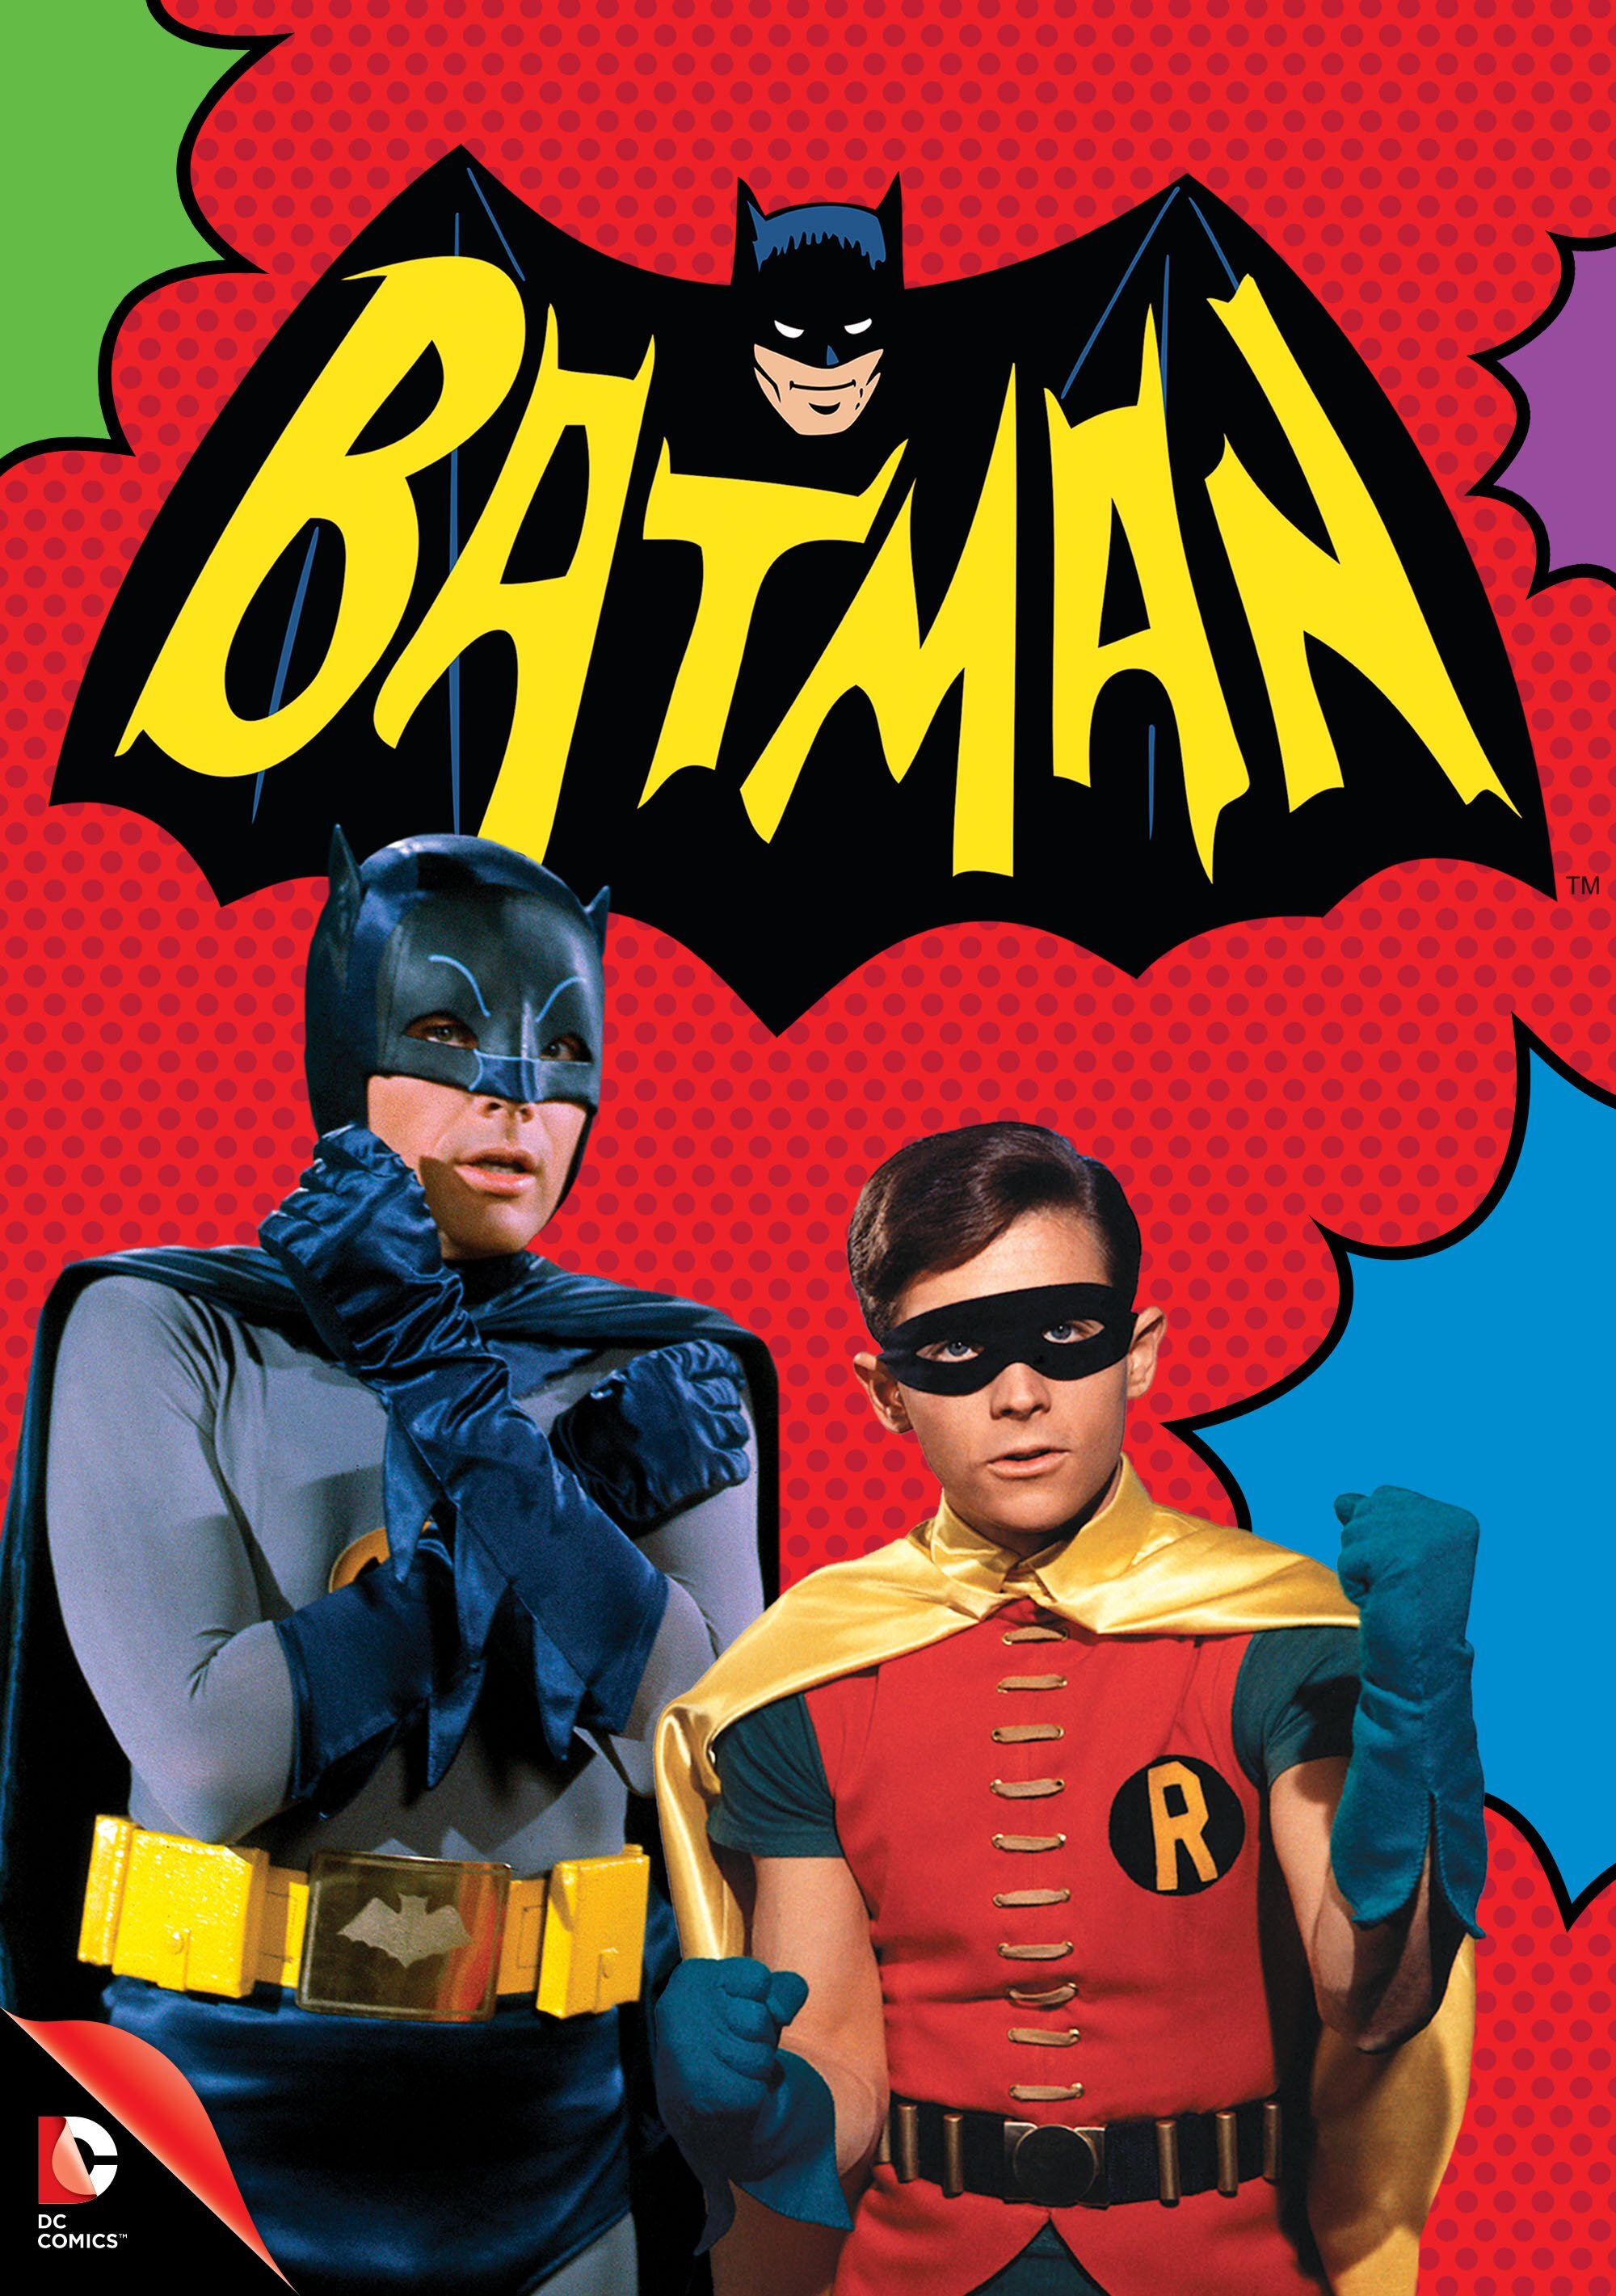 Batman: The Complete Original Series (Box Set) - Blu-ray [ 1968 ]  - Comedy Television On Blu-ray - TV Shows On GRUV